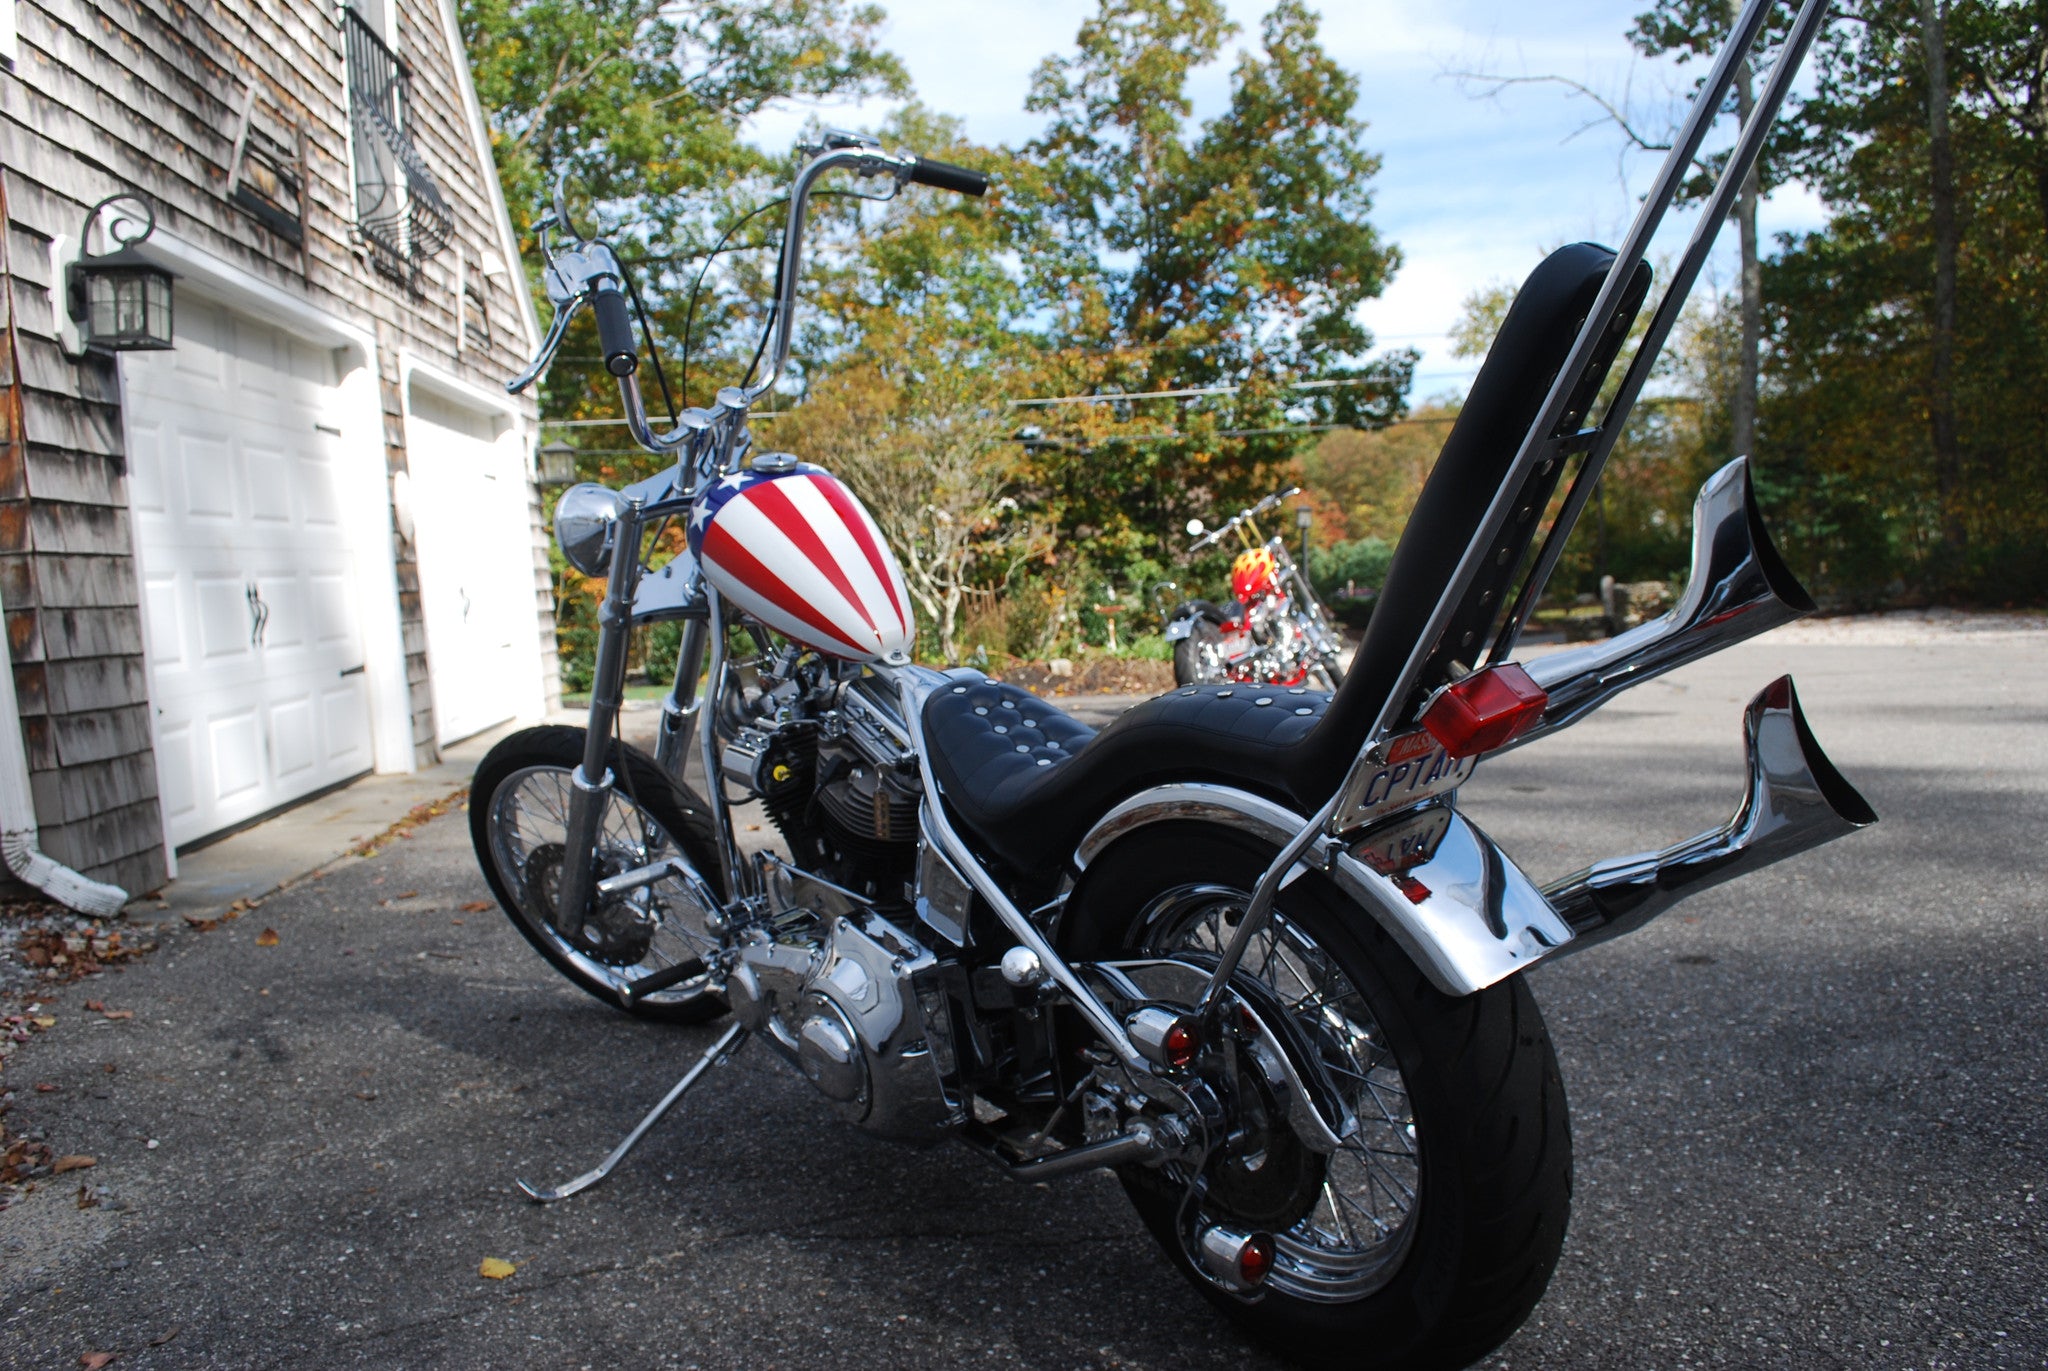 captain america motorcycle for sale